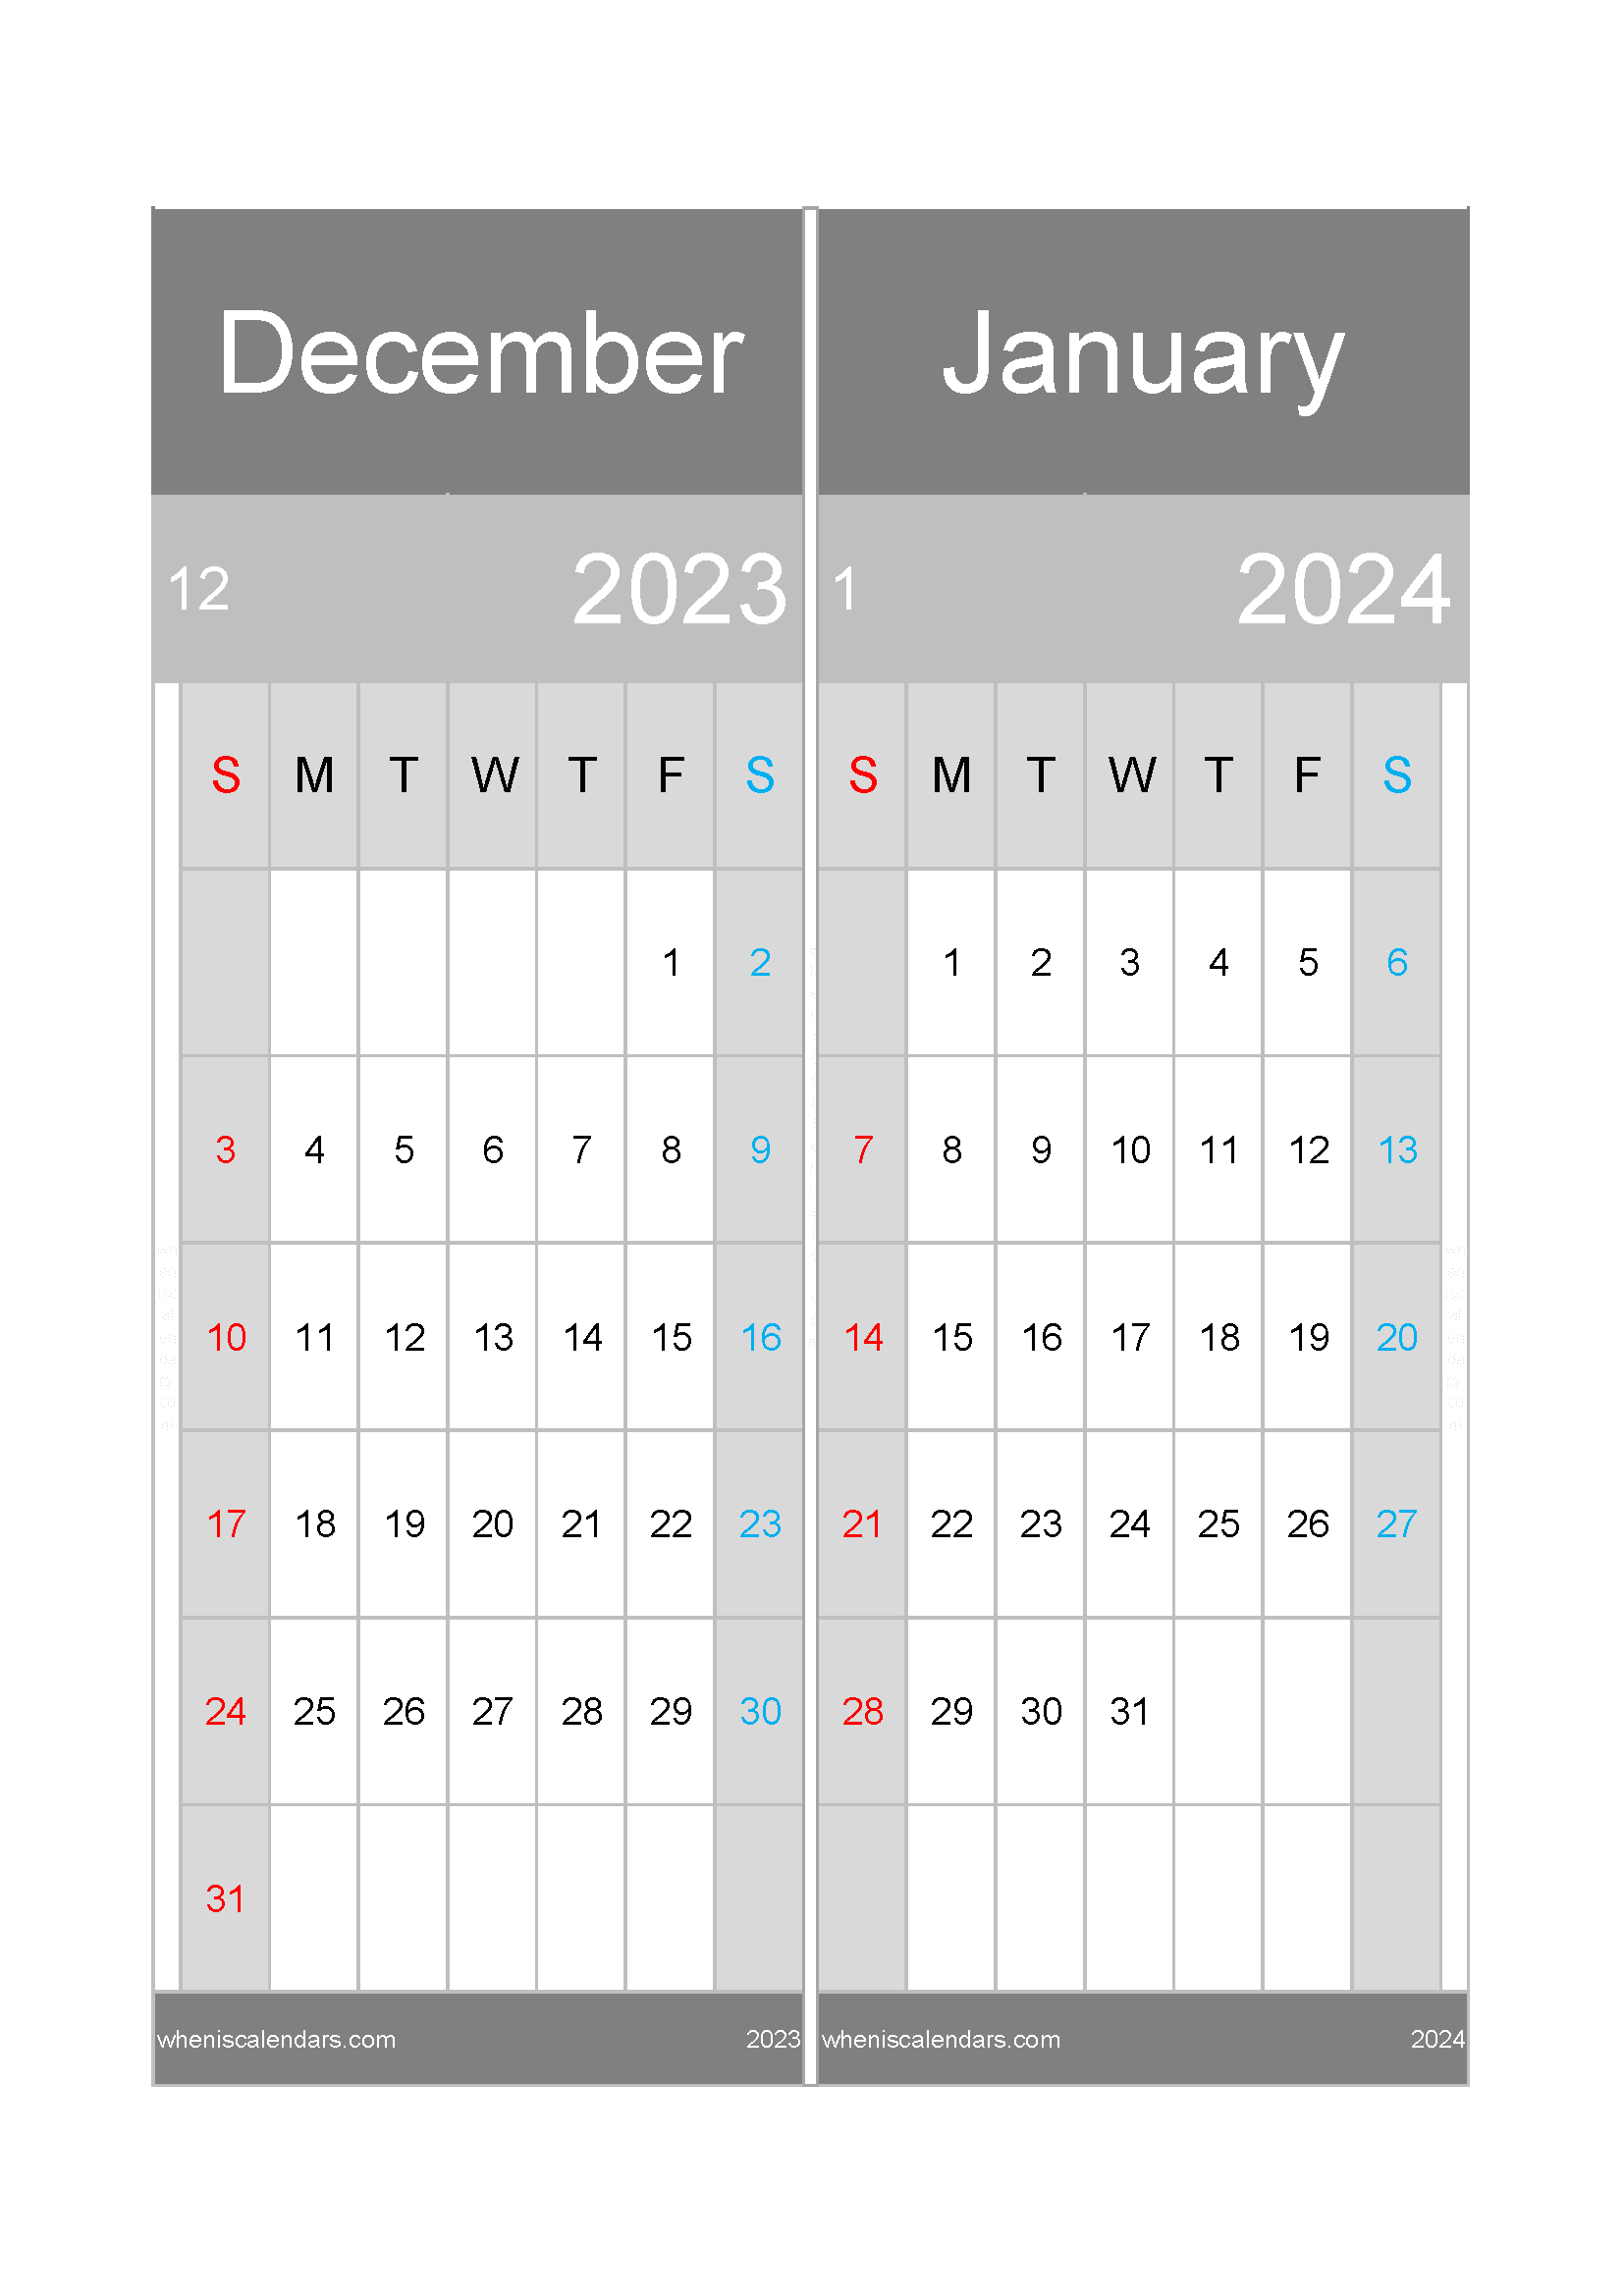 calendar for the month of December 2023 and January 2024 DJ232047